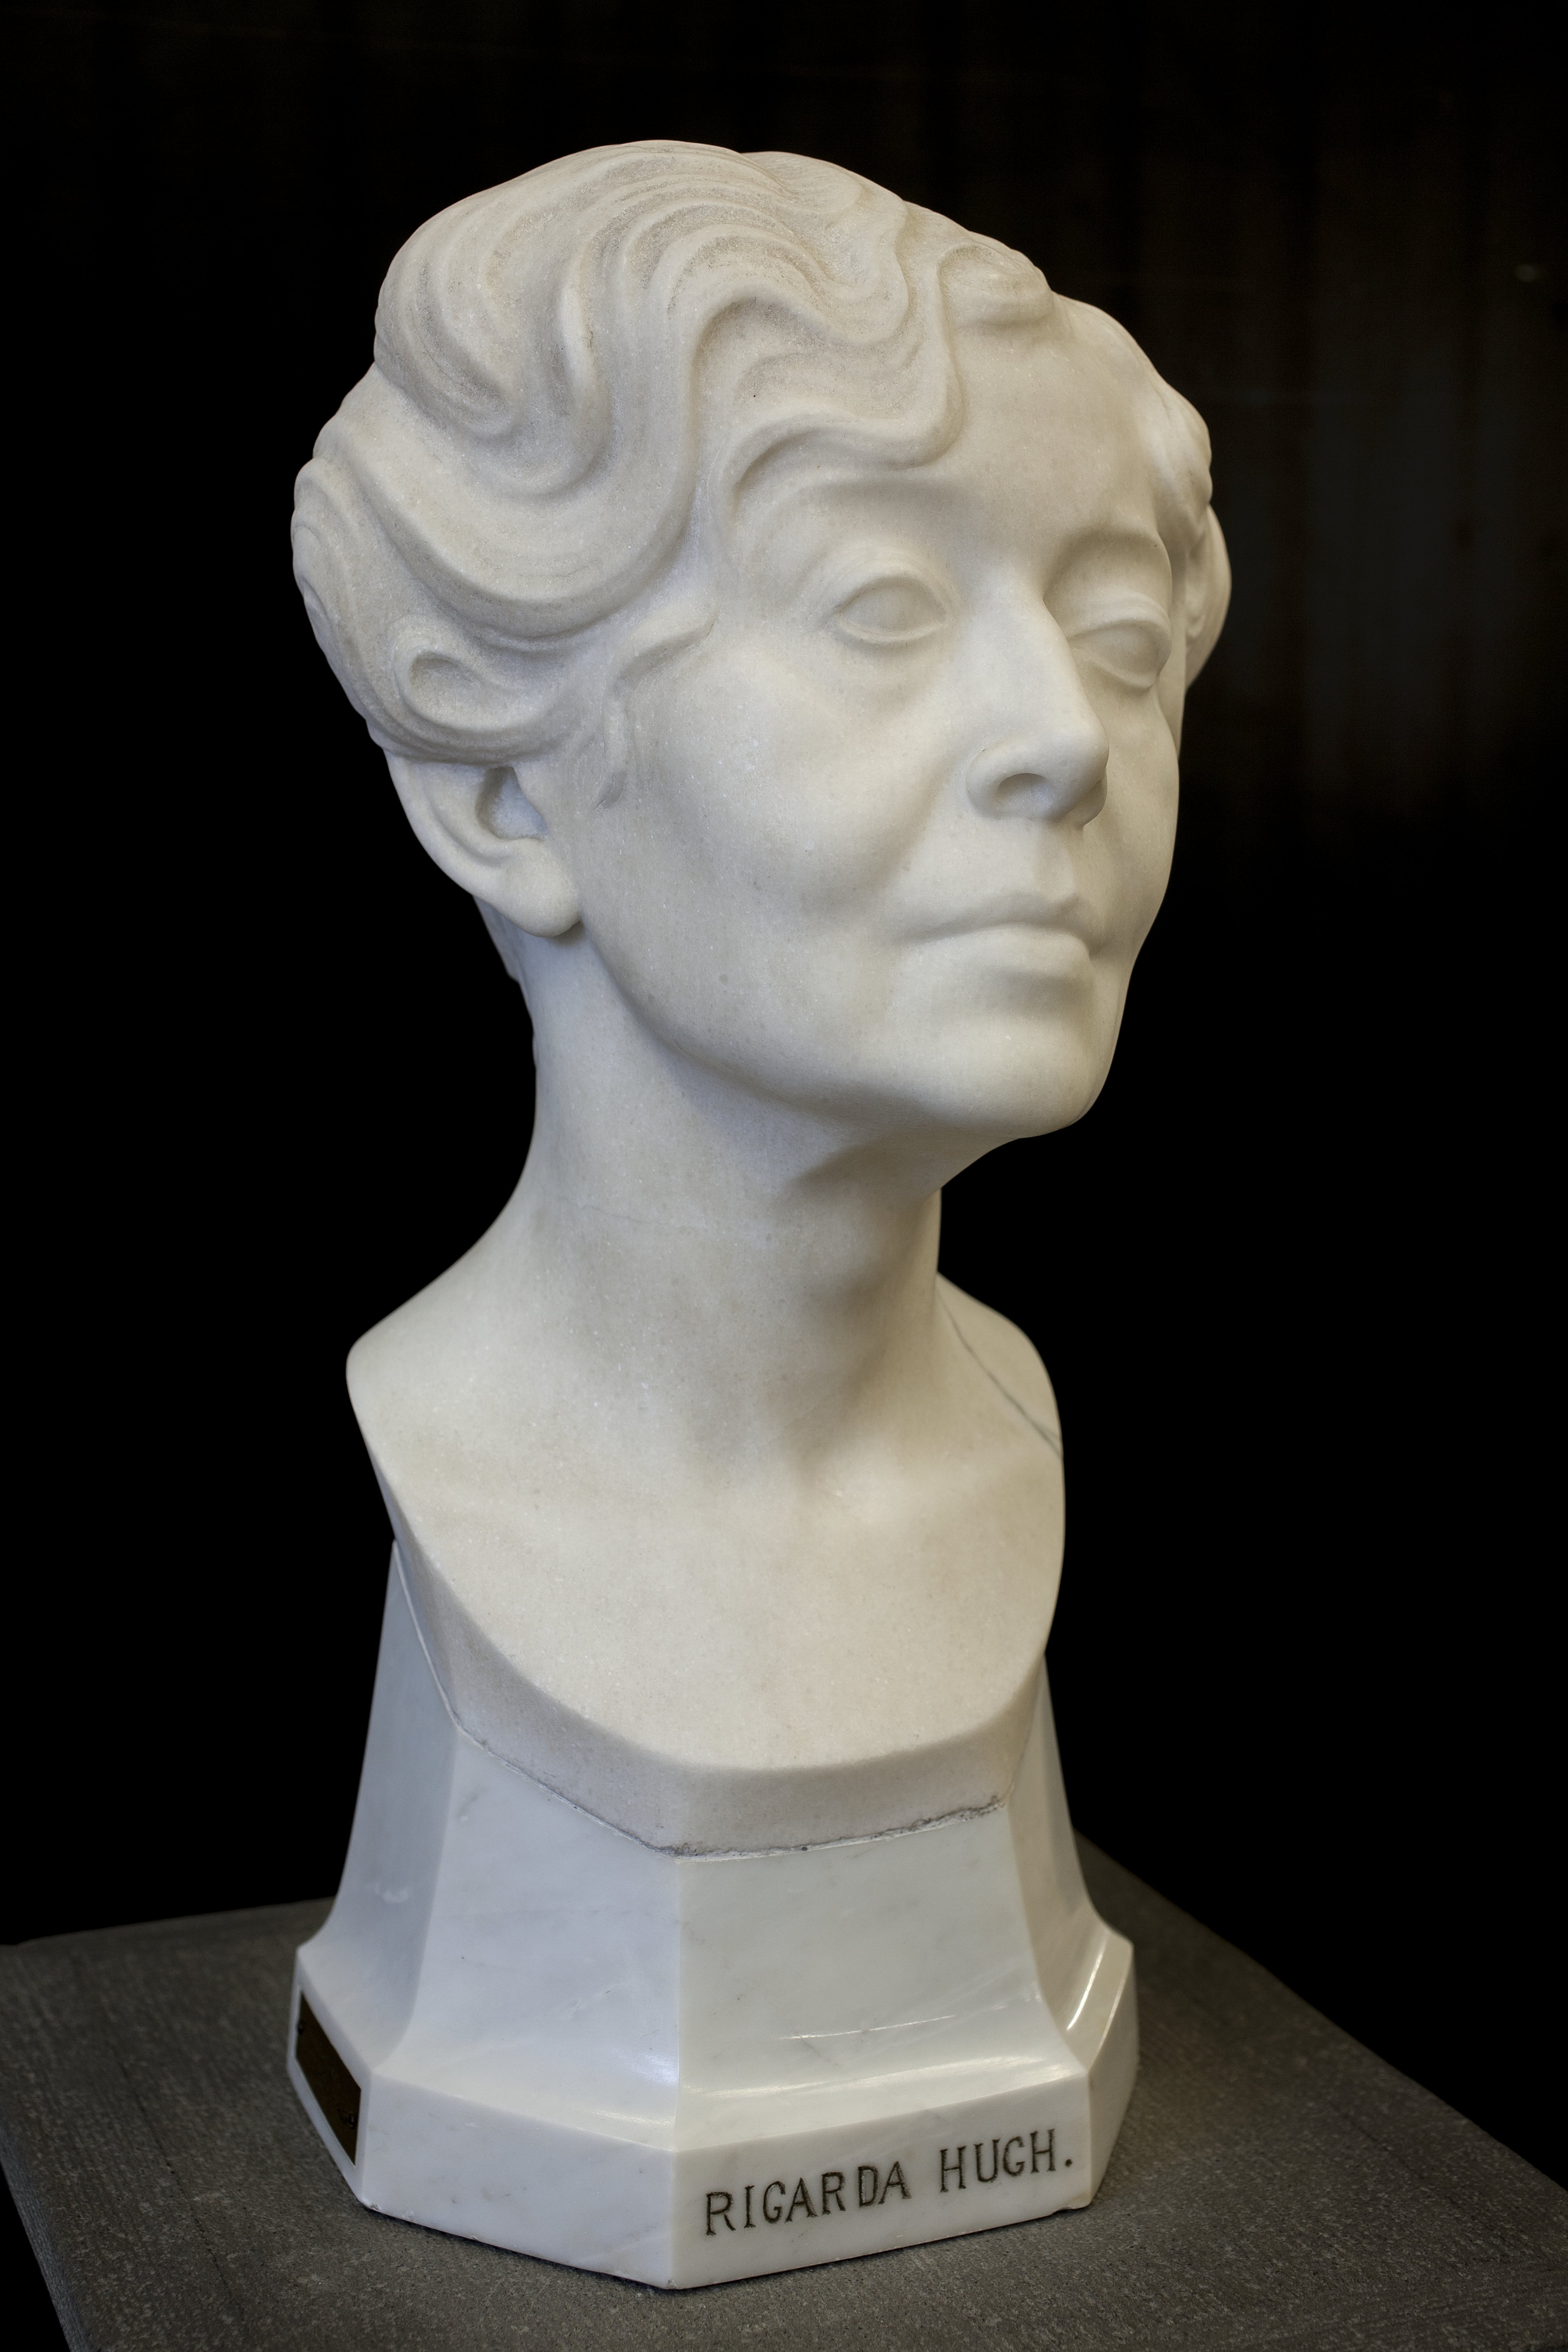 Ricarda Huch; 1916, by the sculptor, [[Paul Peterich